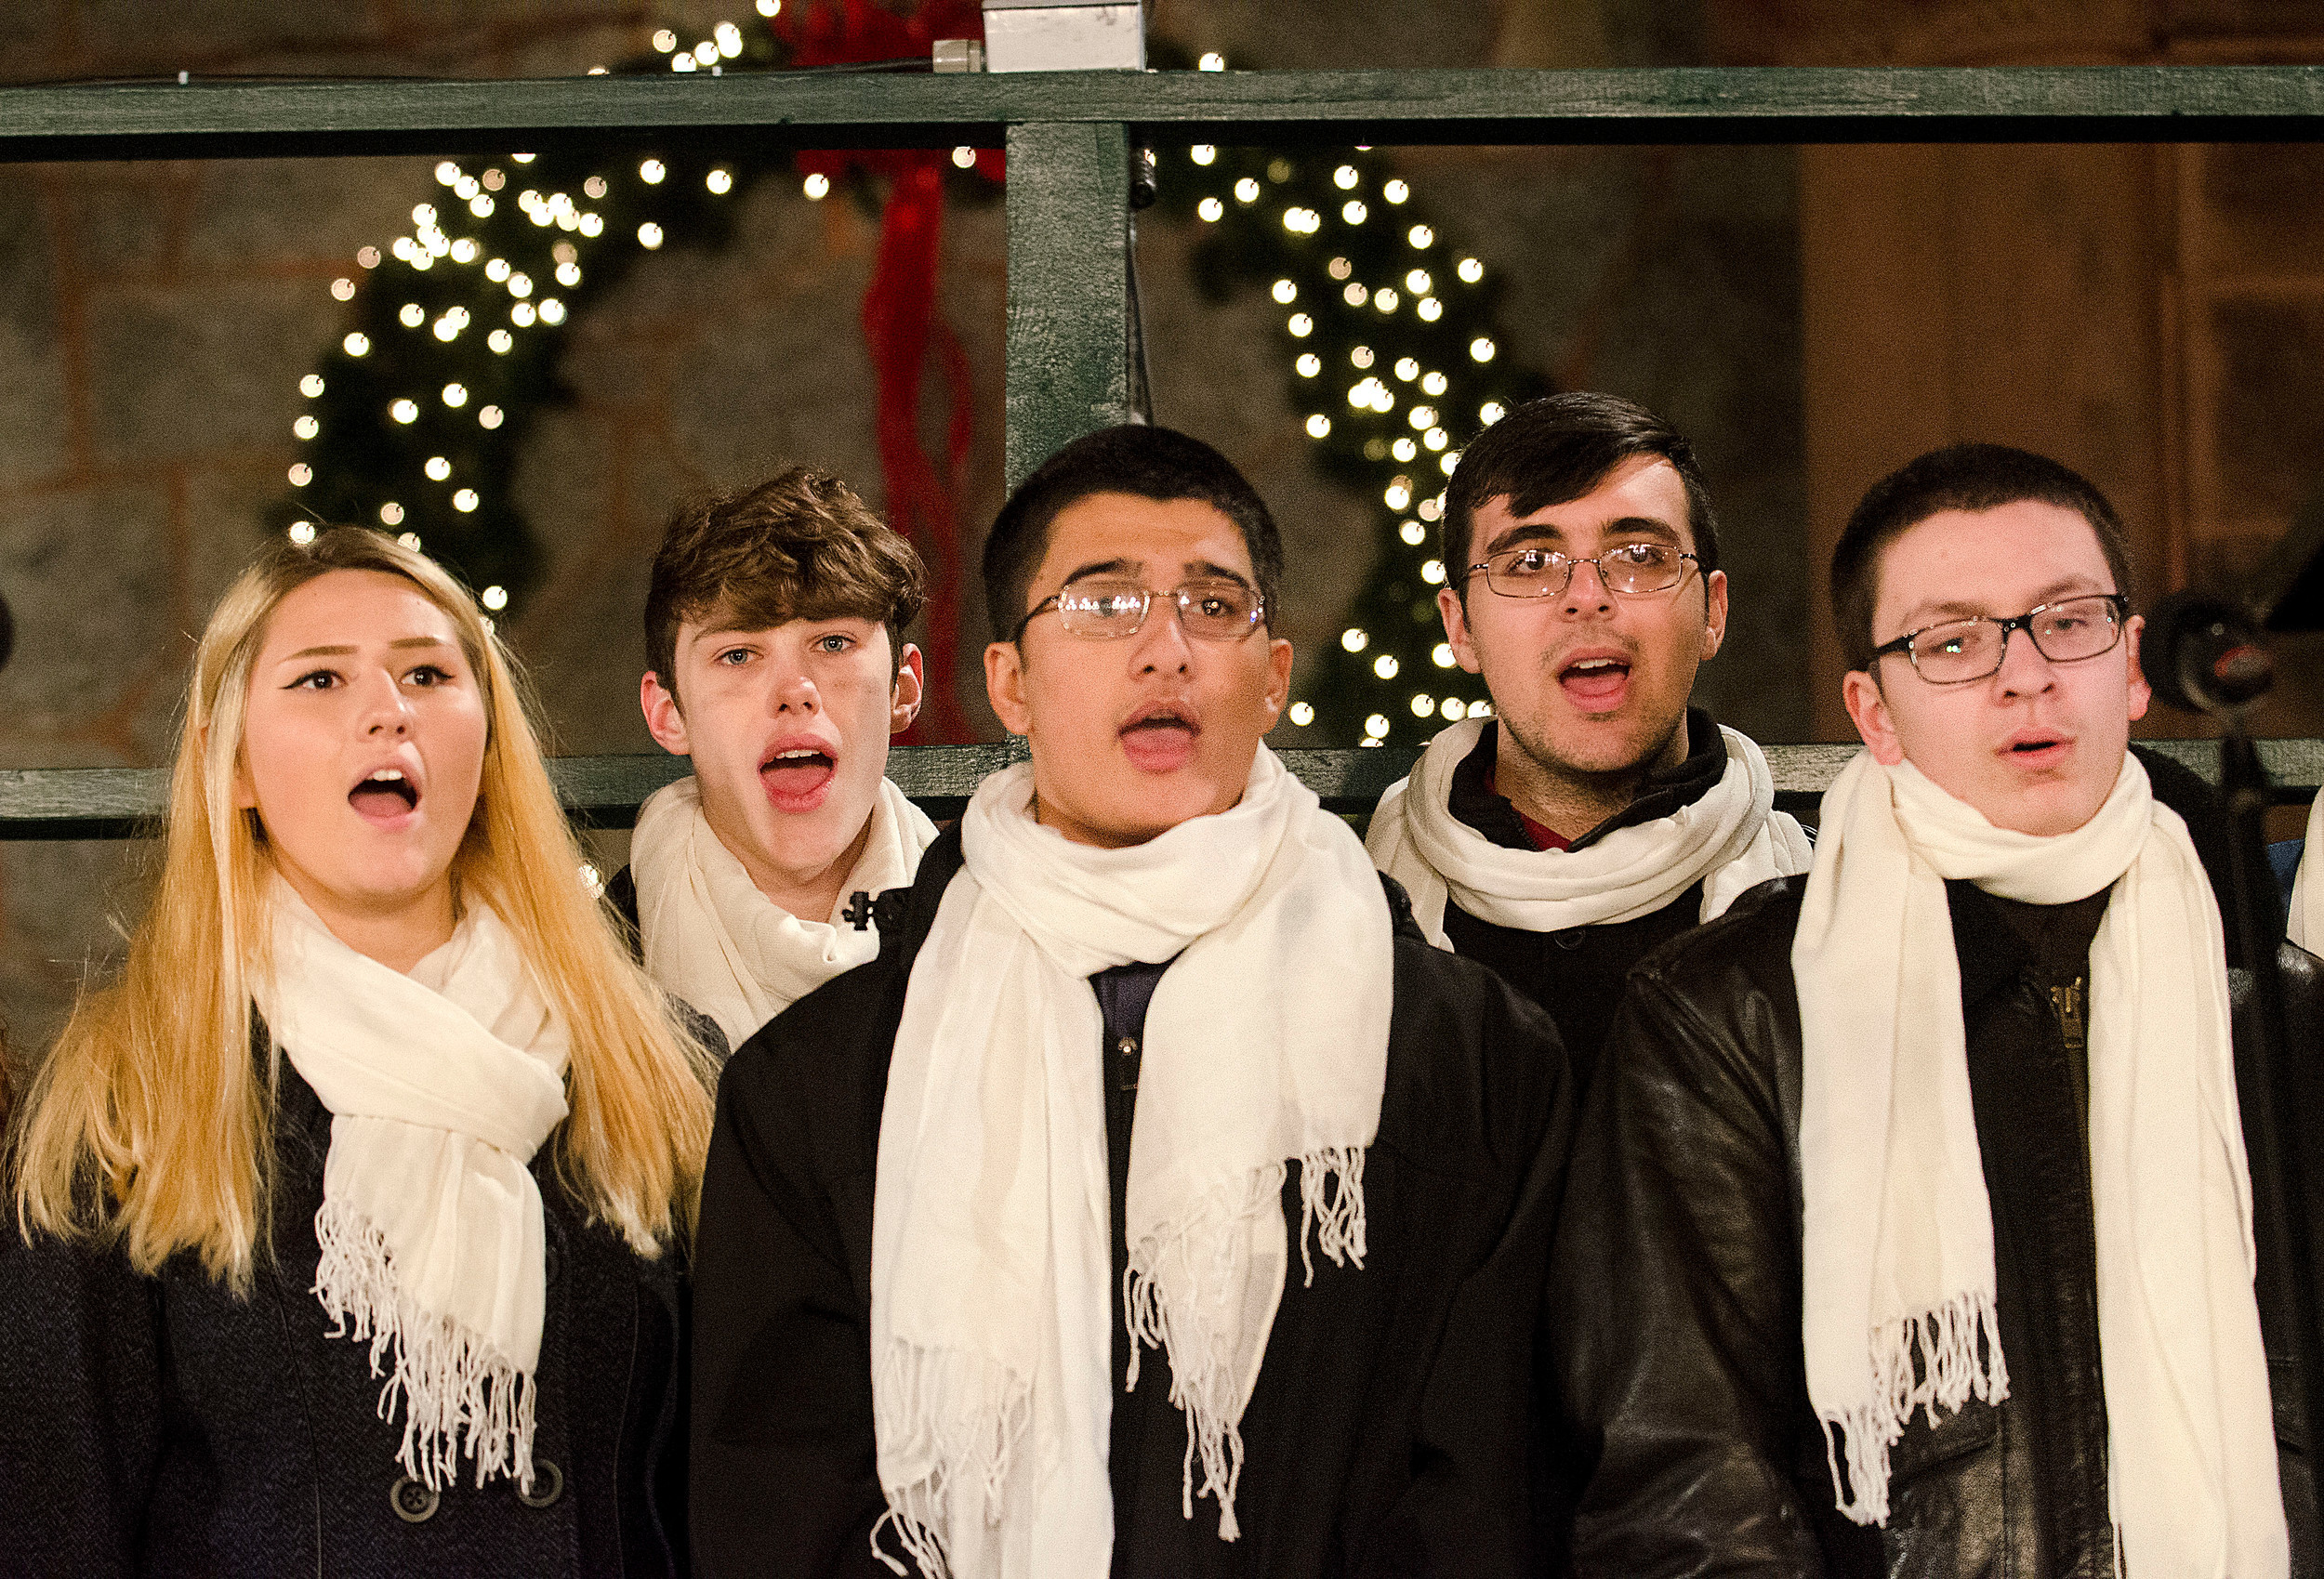 The Mt. Hope Vocal Ensemble sing Holiday songs.